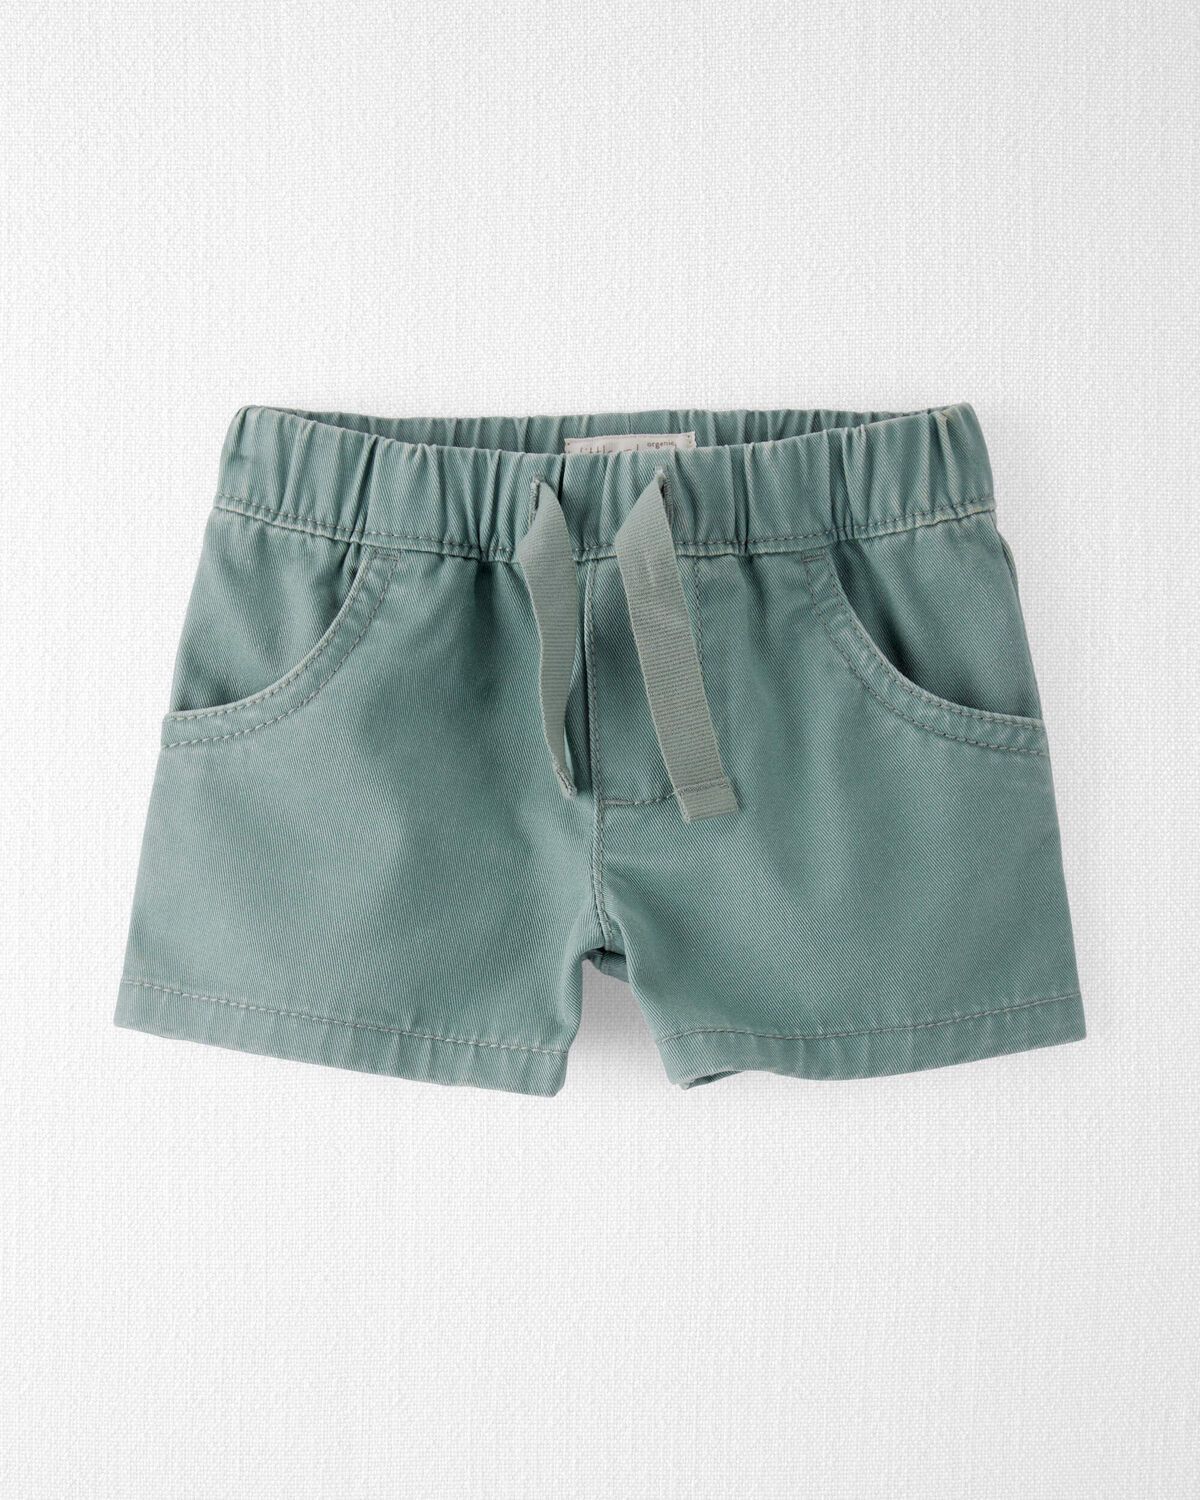 Spring Moss Baby Organic Cotton Drawstring Shorts in Green | carters.com | Carter's